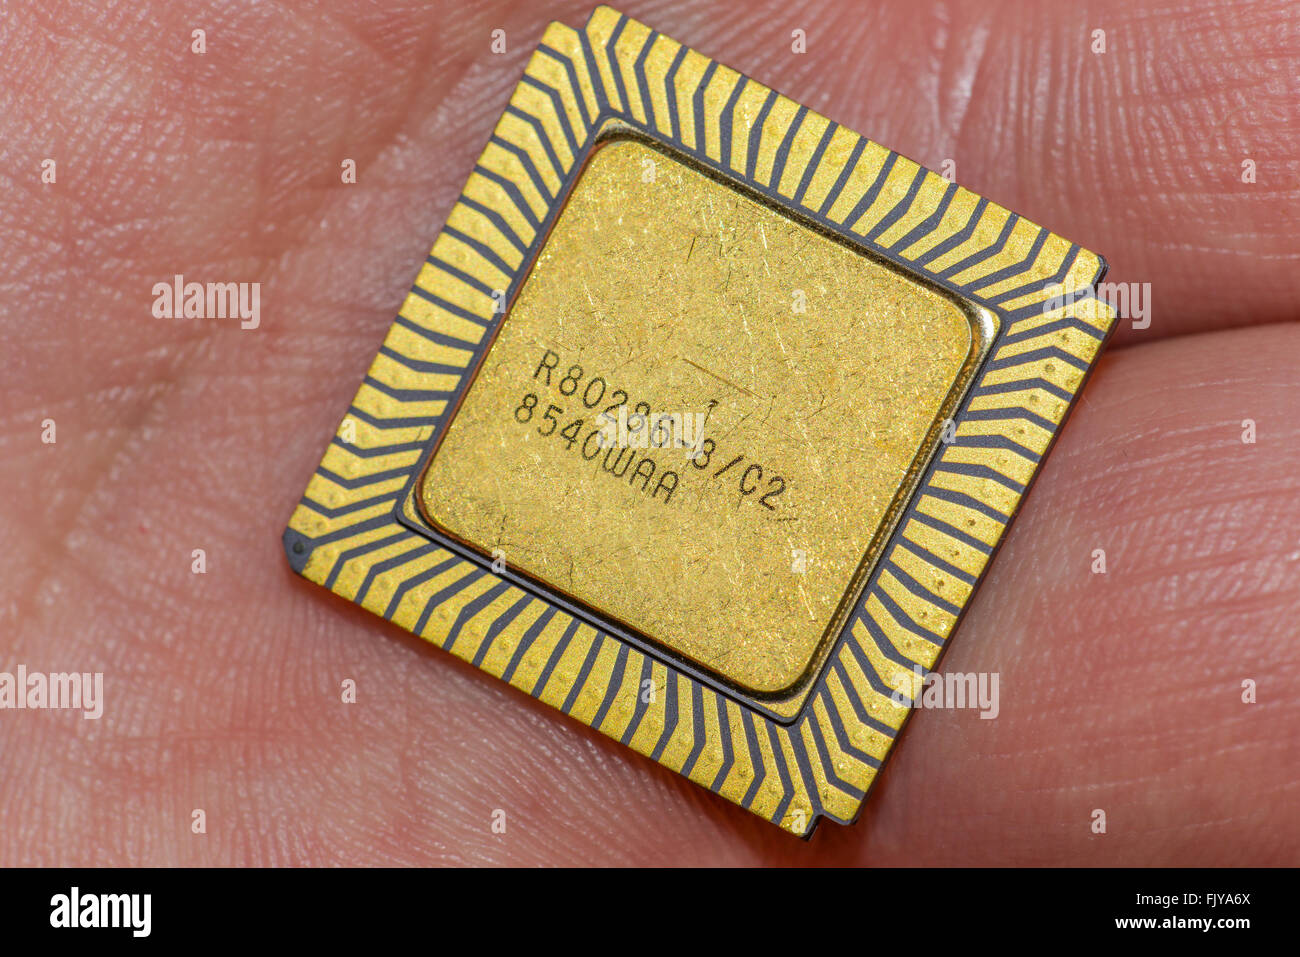 One vintage ceramic CPU in the hand Stock Photo